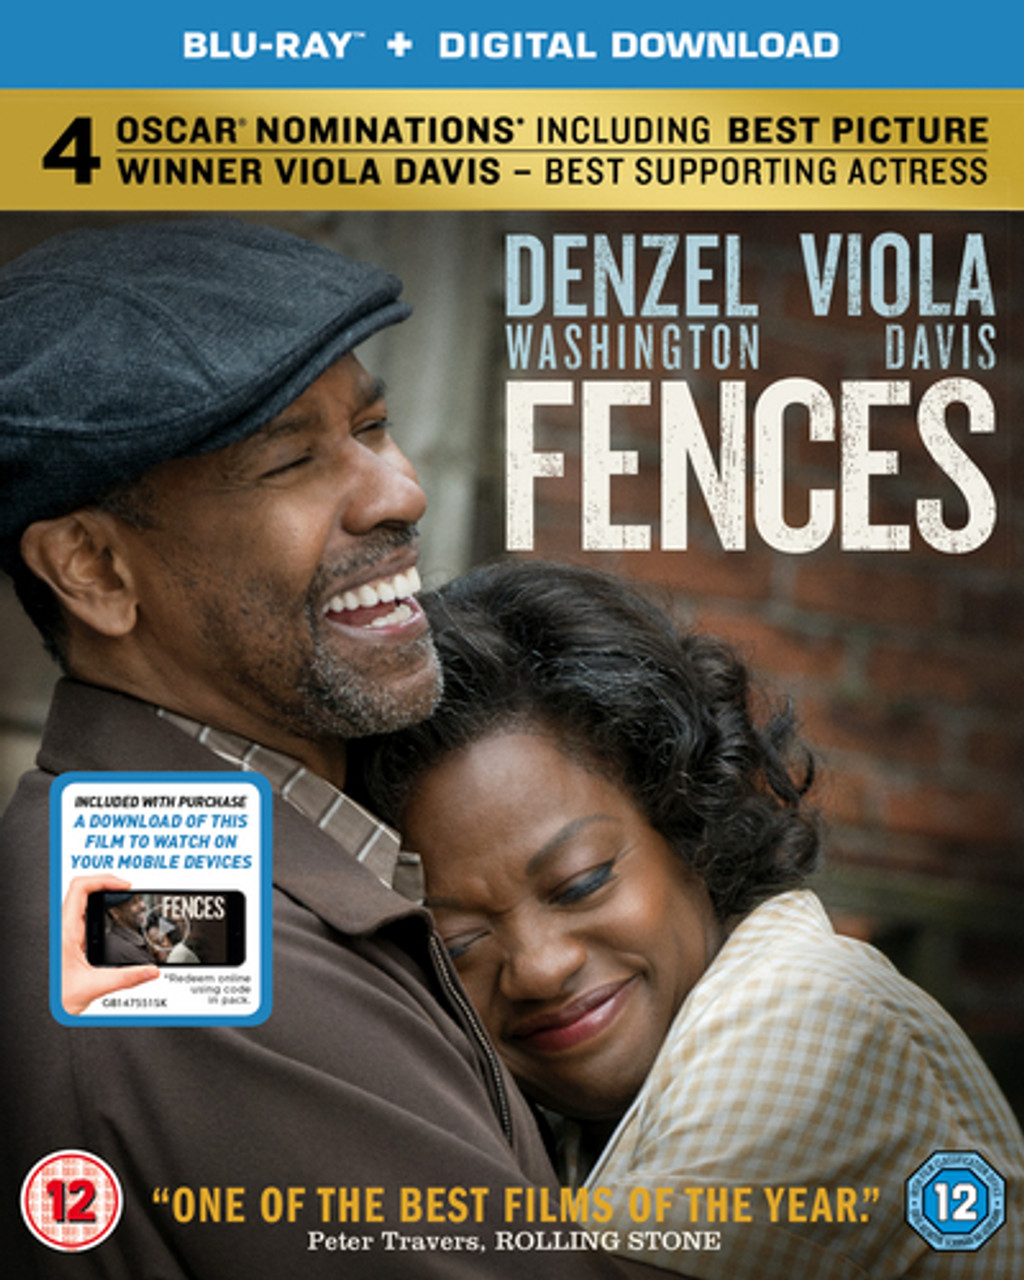 Fences (2016) Blu-ray / with Digital Download